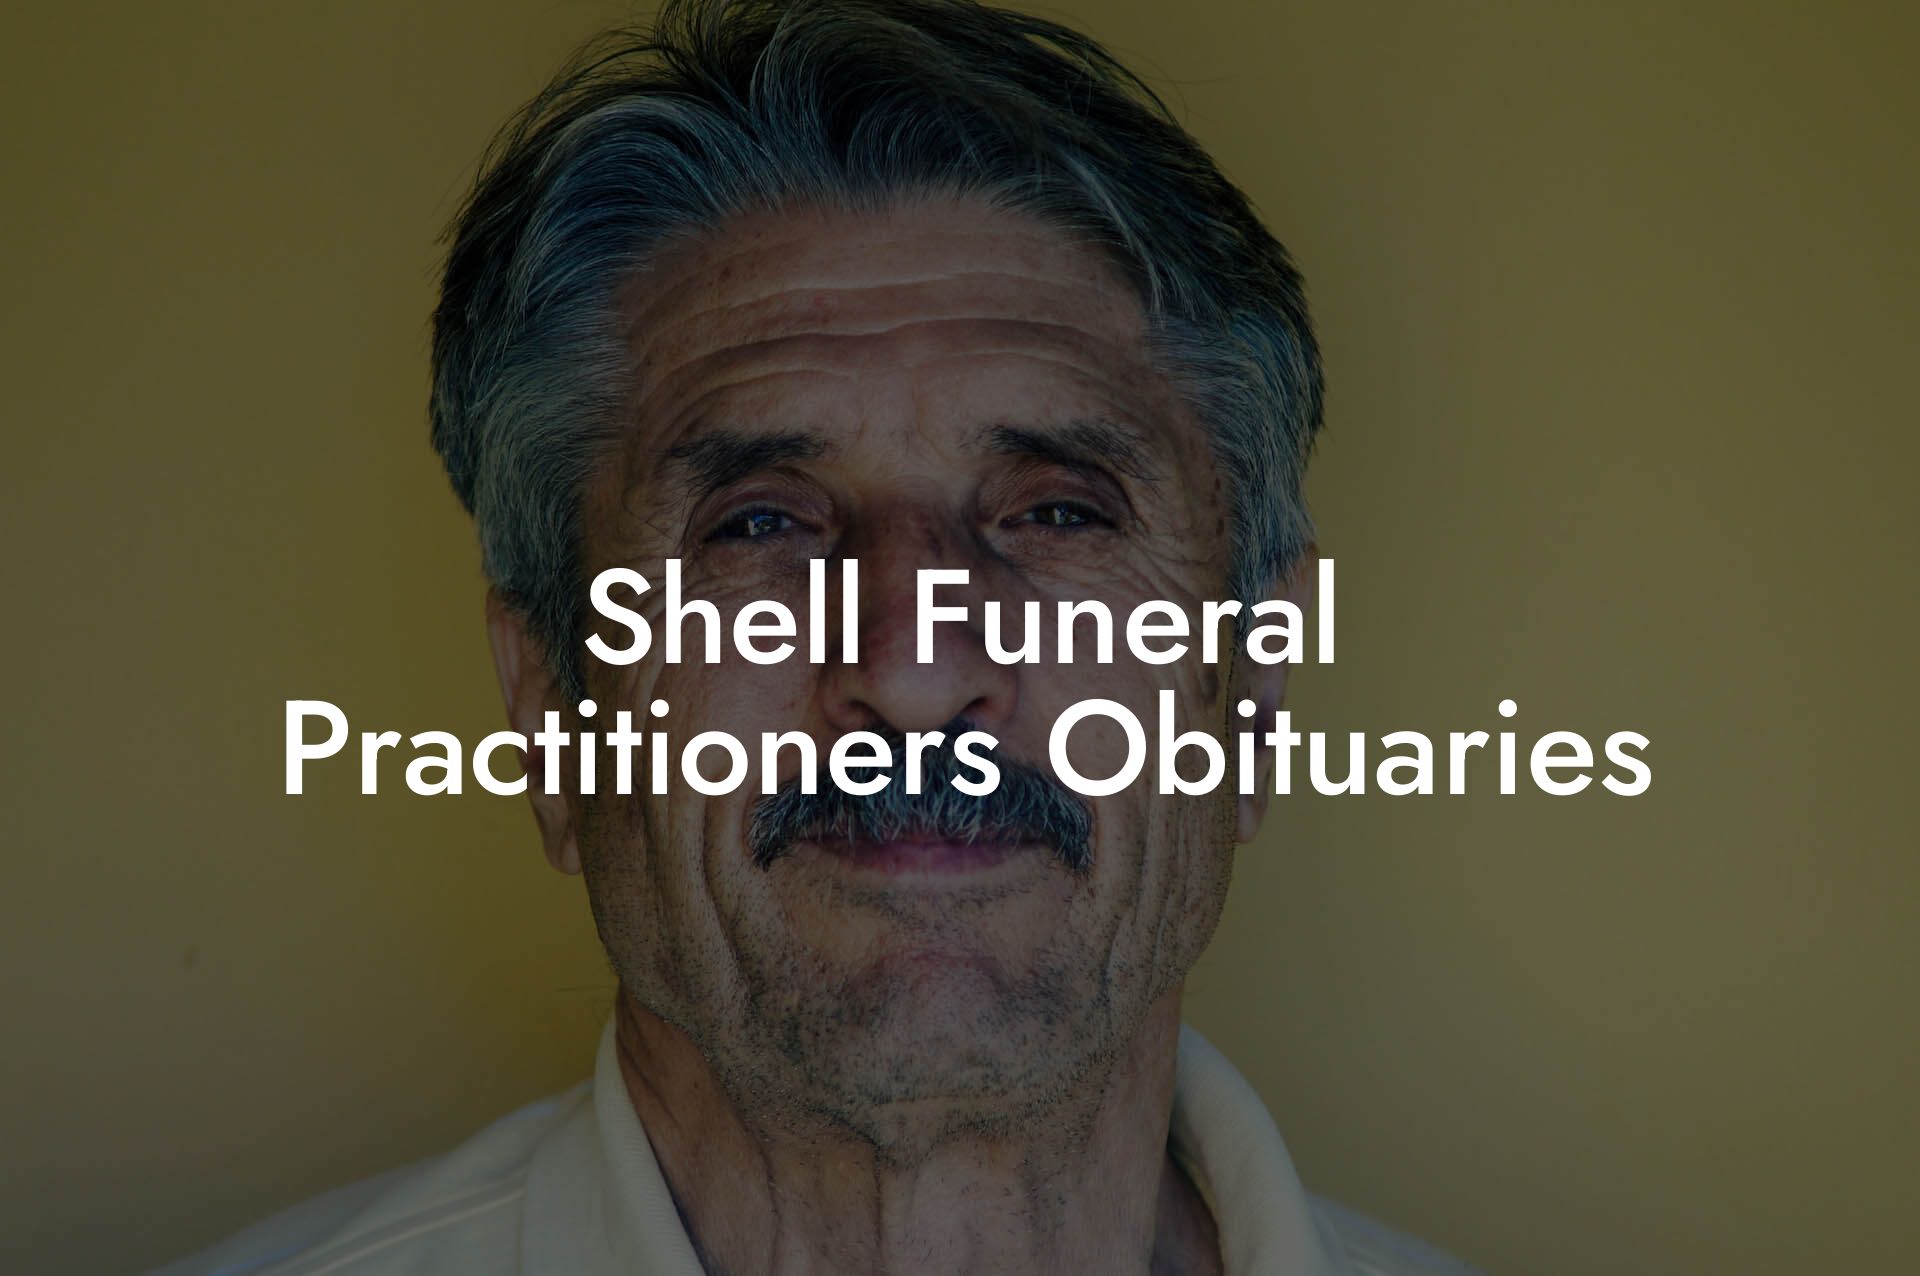 Shell Funeral Practitioners Obituaries